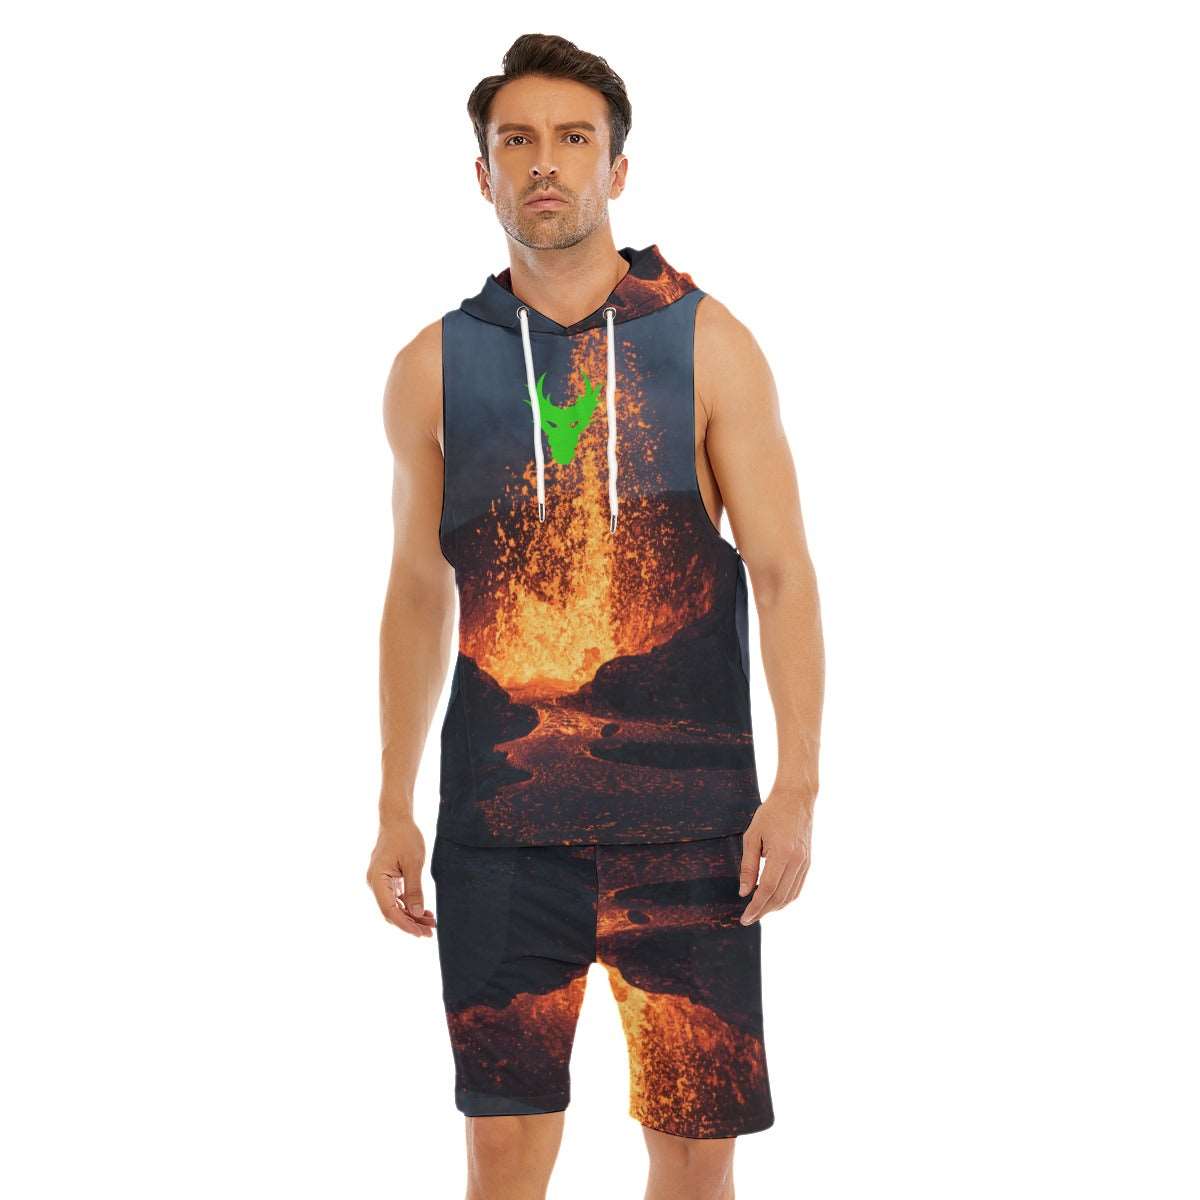 Fired up lime green dragon centered Men's Sleeveless Vest And Shorts Sets